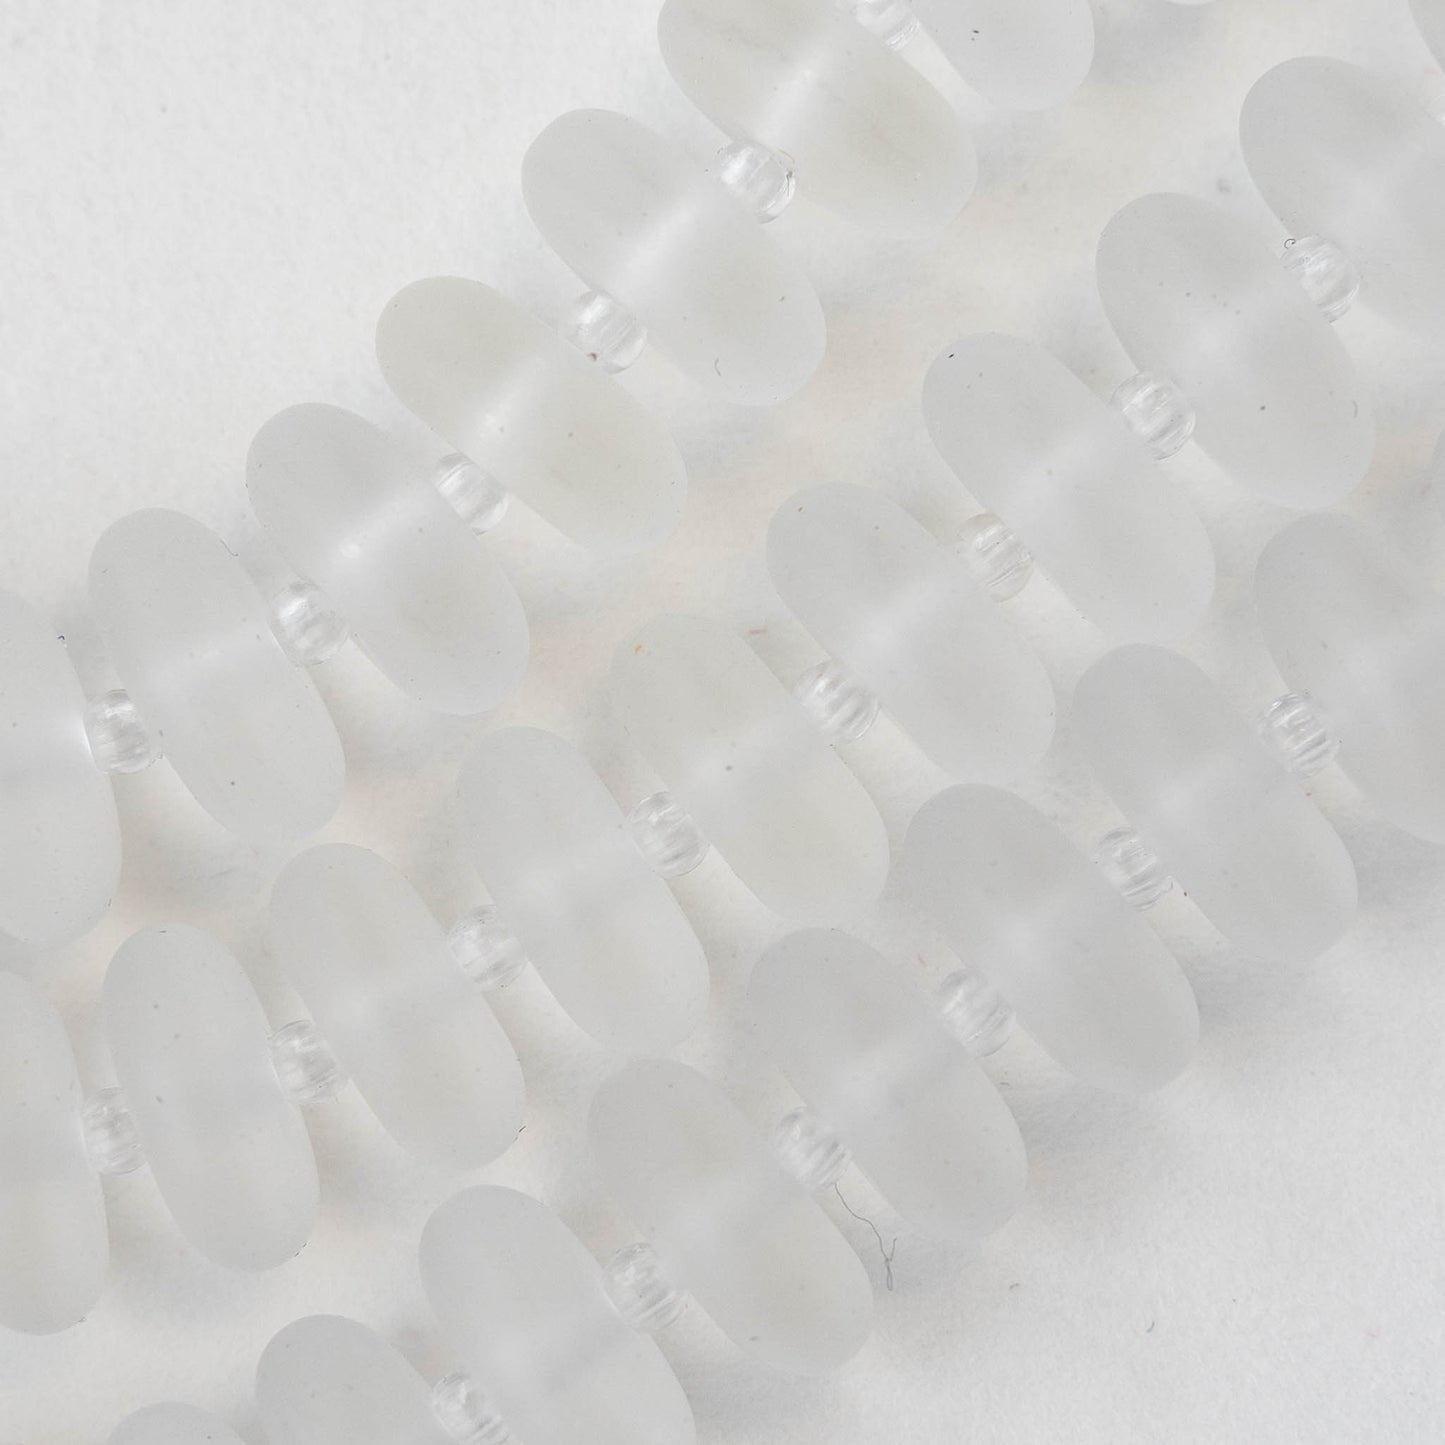 5x12mm Frosted Glass Rondelle - Crystal - 28 Beads